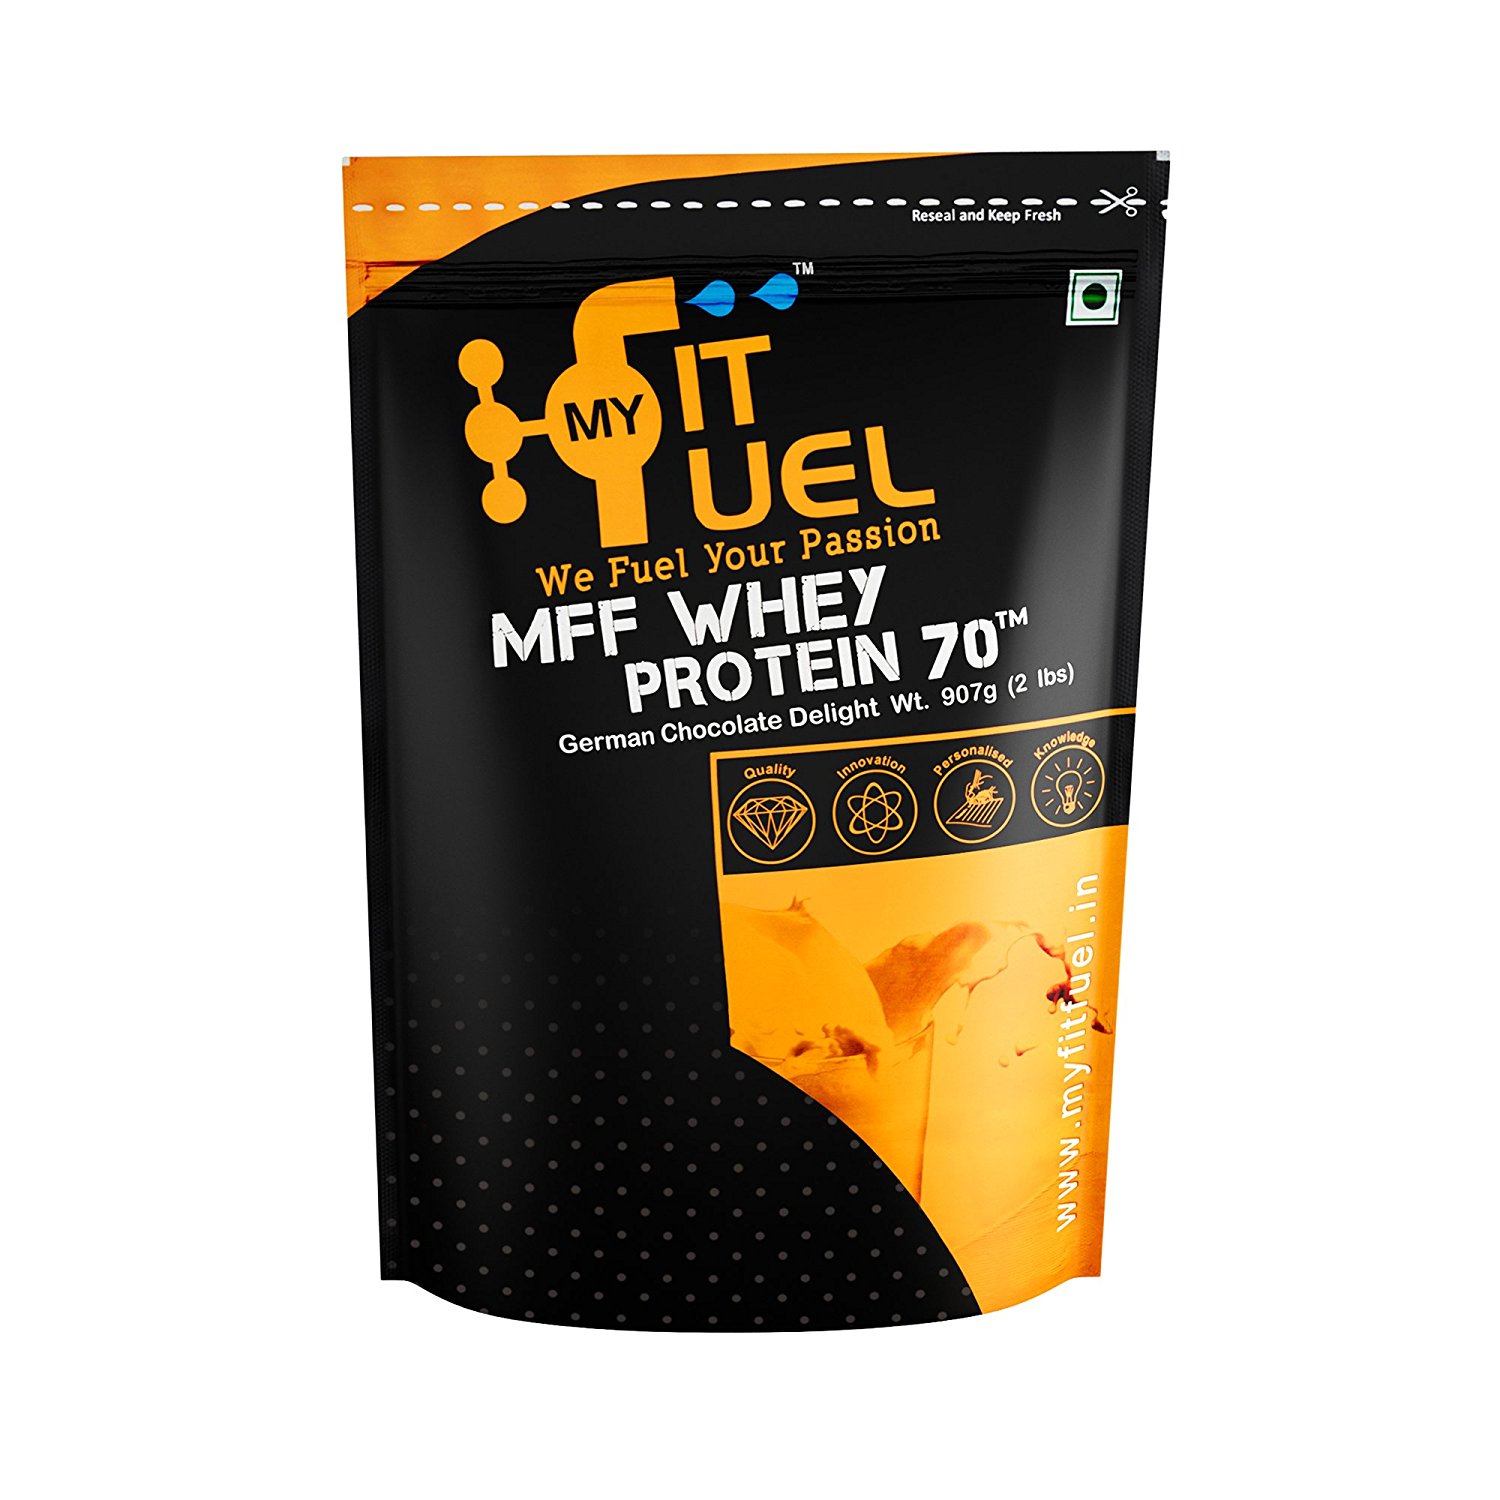 MFF-Whey-Protein-70-2-Lbs-|20-gm-Protein